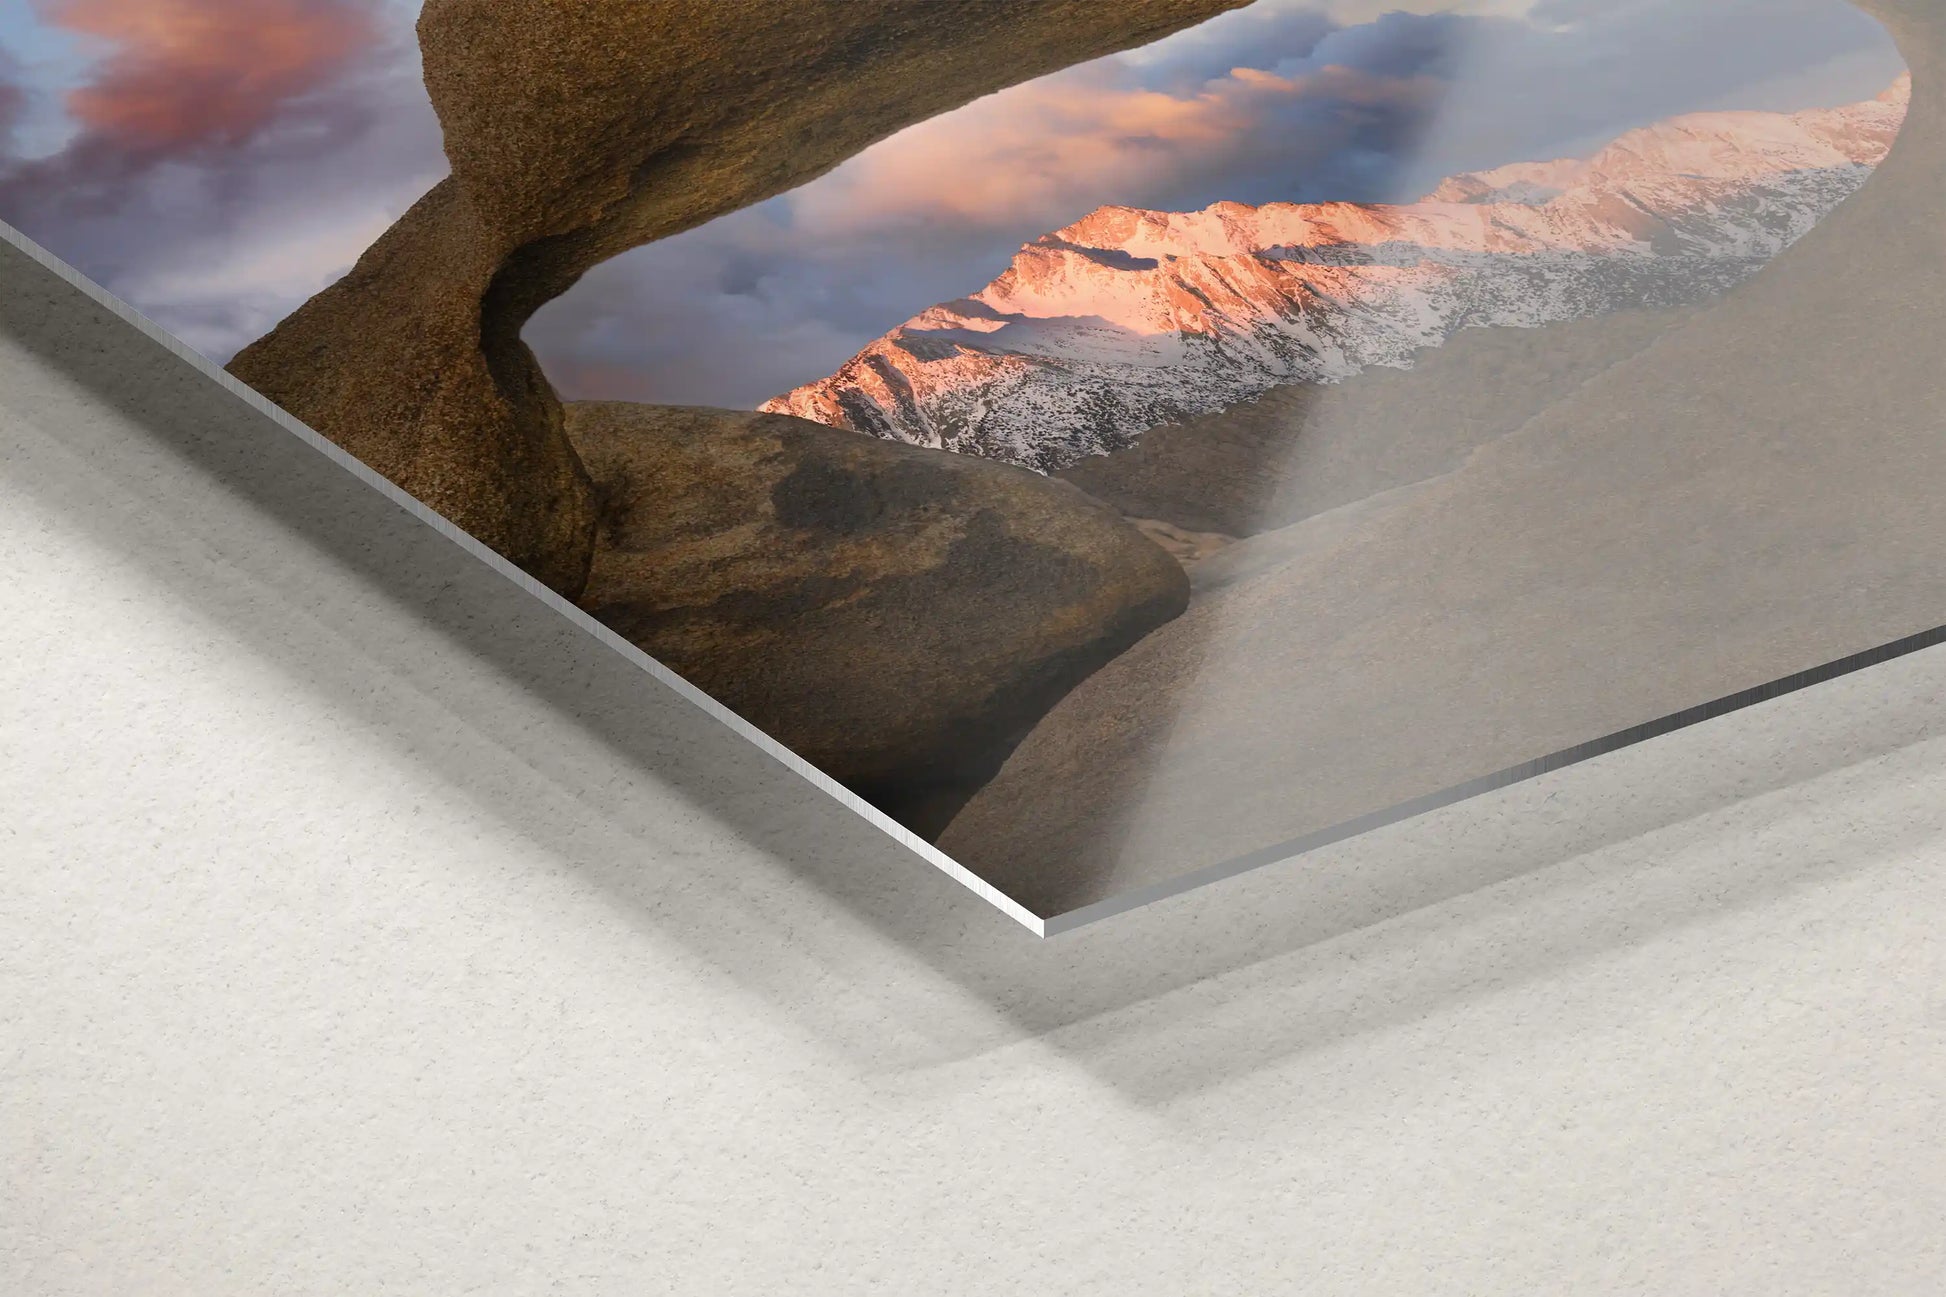 Detailed close-up of a metal print edge, emphasizing the durability while displaying Lone Pine Peak through Mobius Arch.Texture detail of canvas print edge, highlighting the quality craftsmanship of the Lone Pine Peak through Mobius Arch art piece.